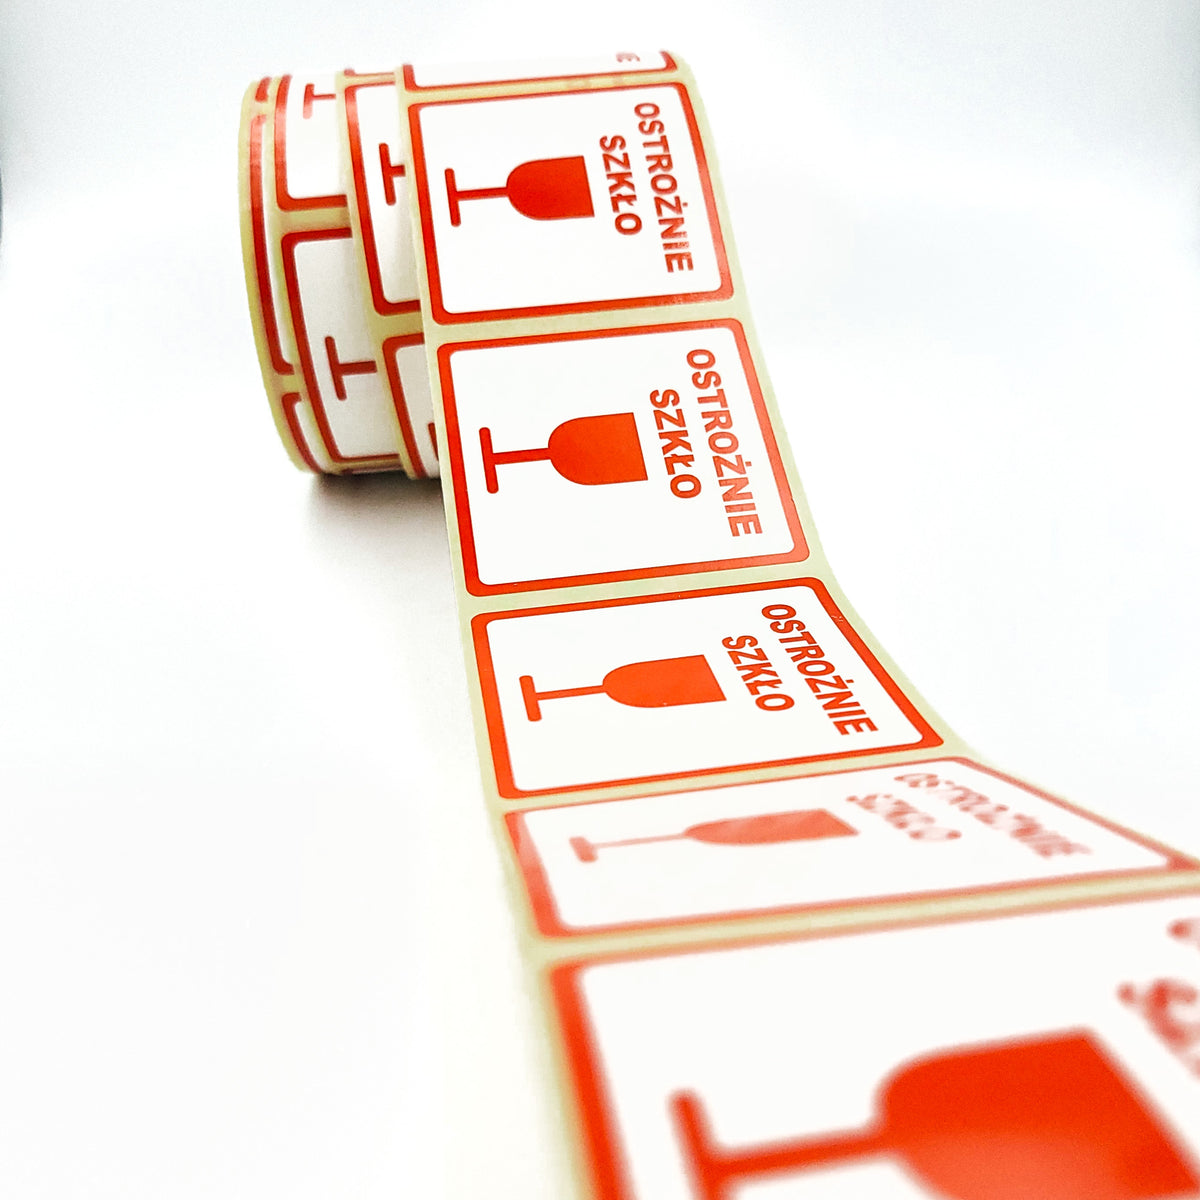 Self-adhesive warning labels - CAUTION GLASS - 50x50mm 50 per roll